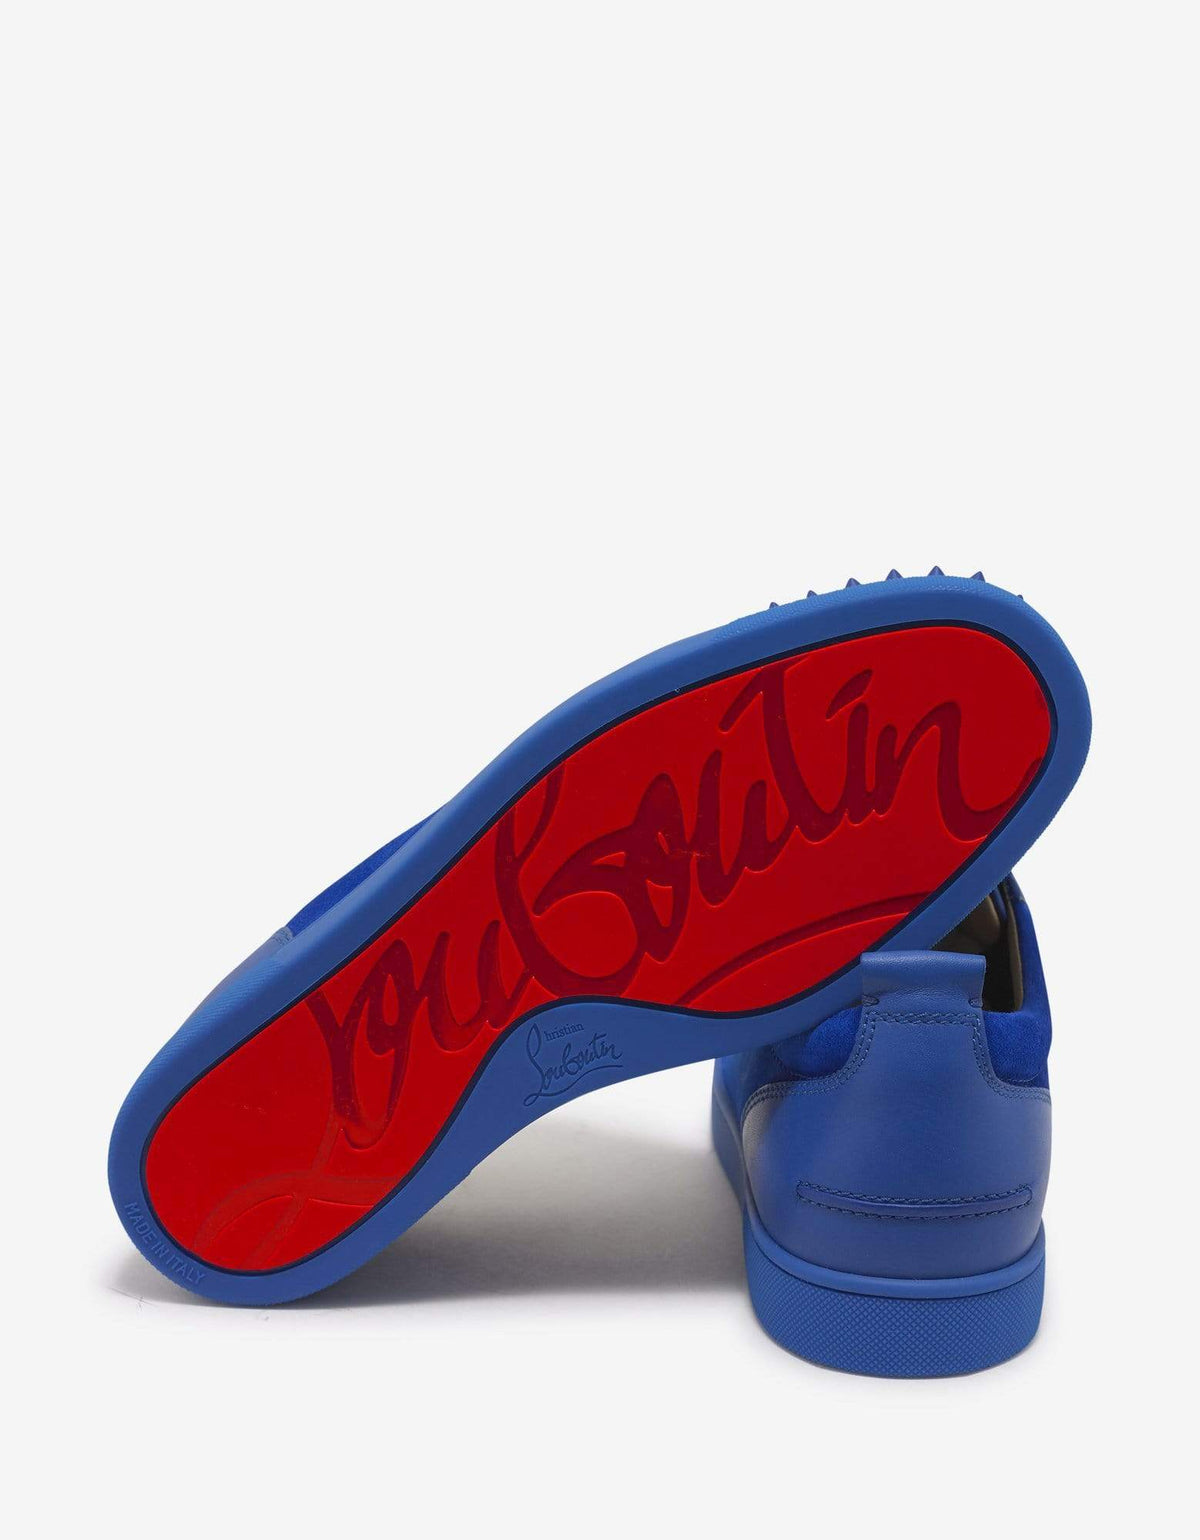 Christian Louboutin Louis Junior Spikes Flat Blue Calf & Suede Trainers